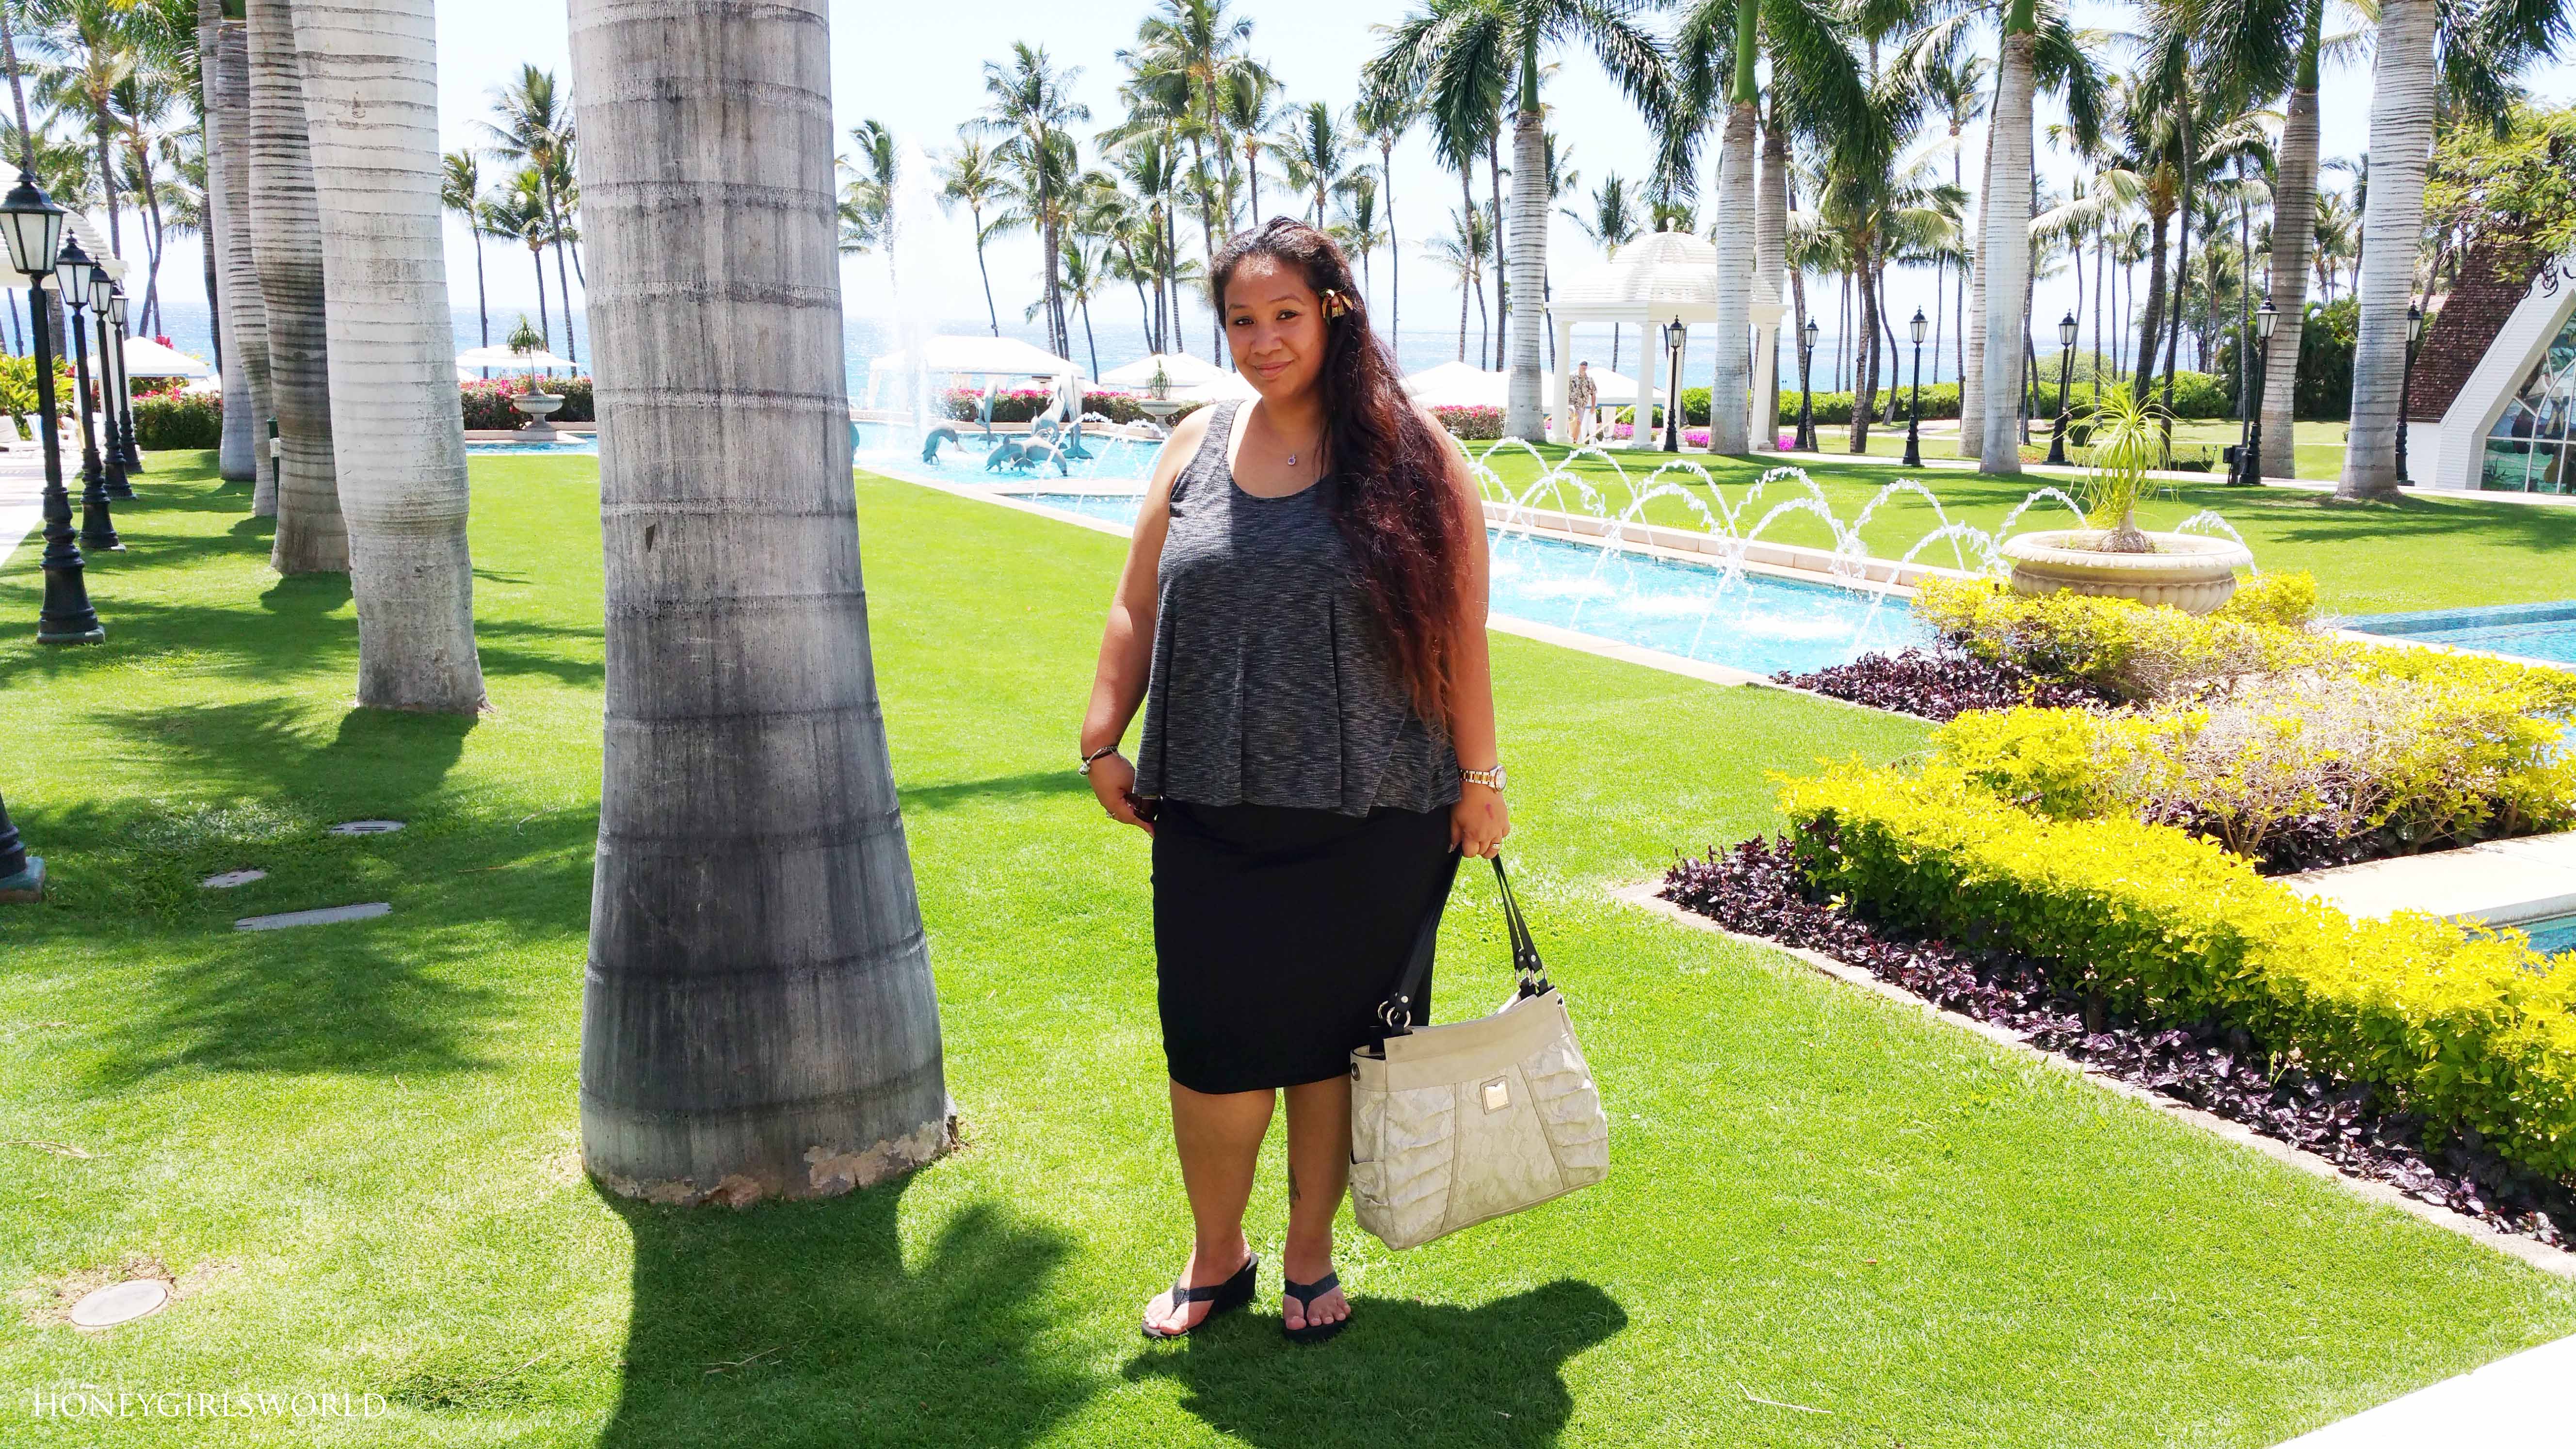 Foodie & Fashion Friday - Mother's Day Recap at the Grand Wailea Resort Waldorf Astoria, Grand Wailea A Waldorf Astoria Resort http://honeygirlsworld.com